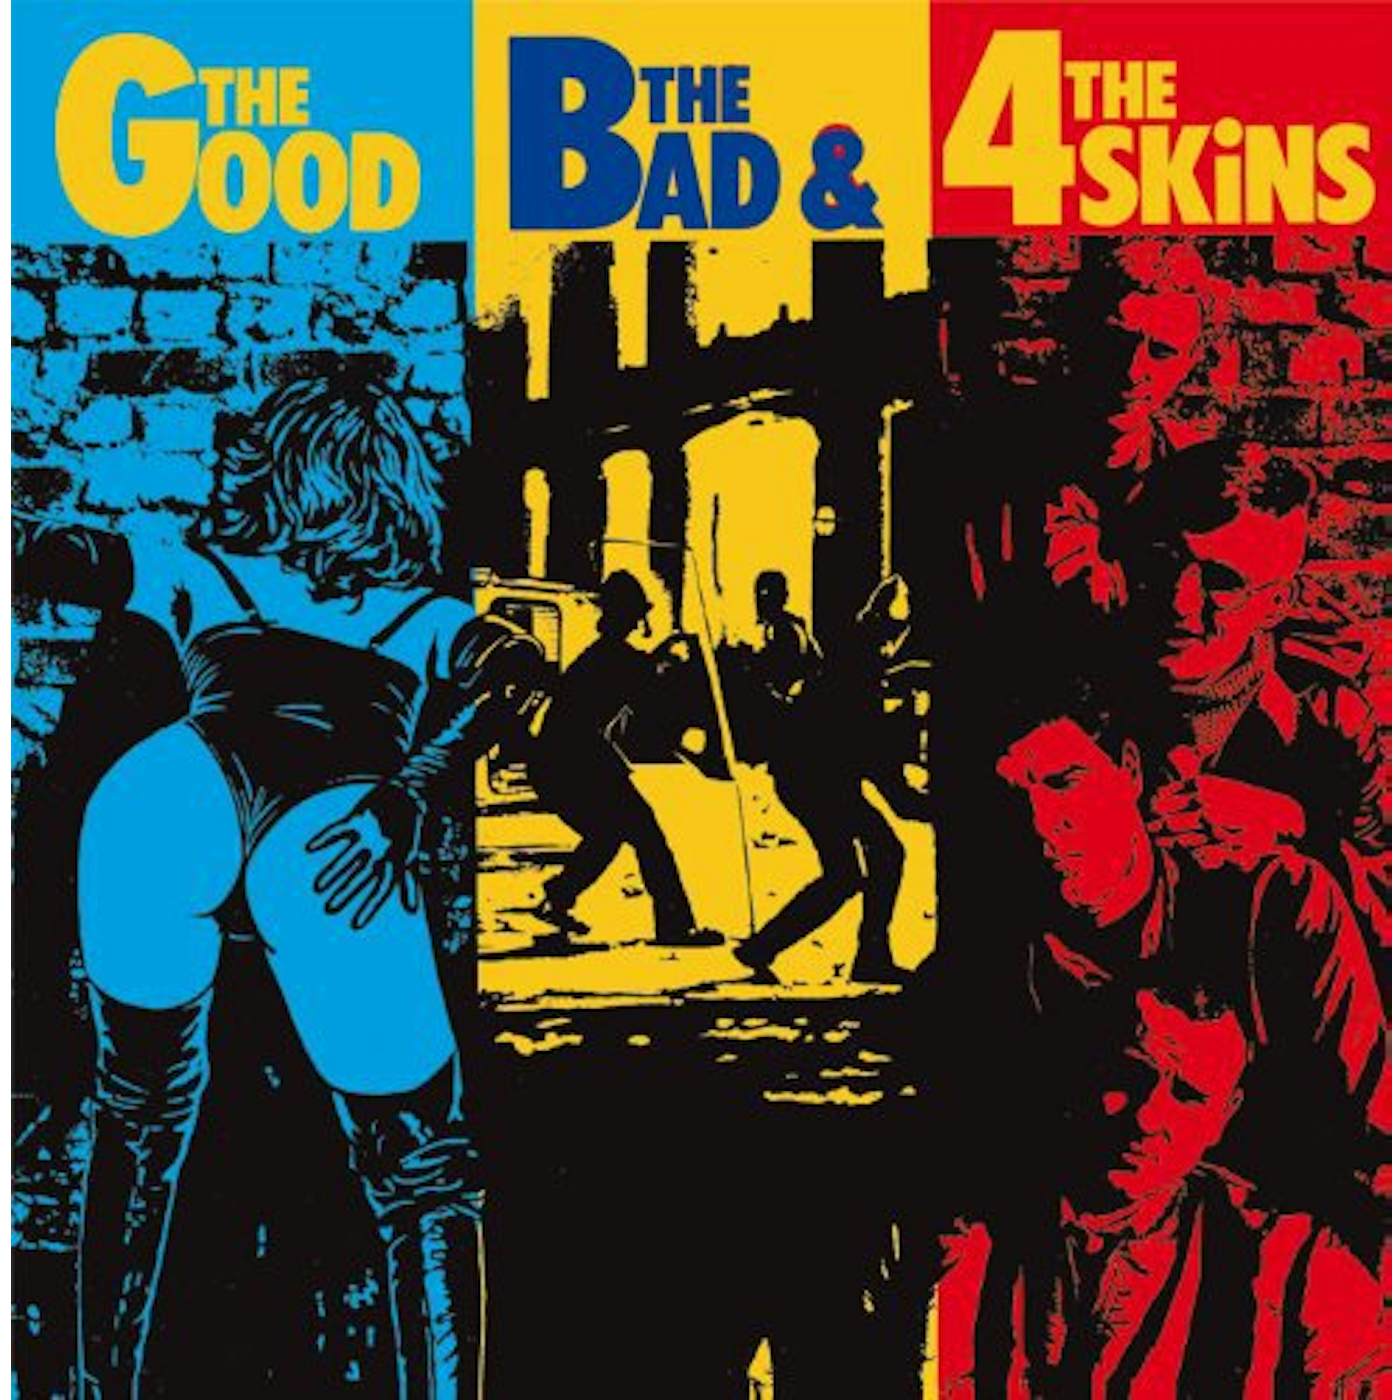 GOOD THE BAD & THE 4 SKINS Vinyl Record